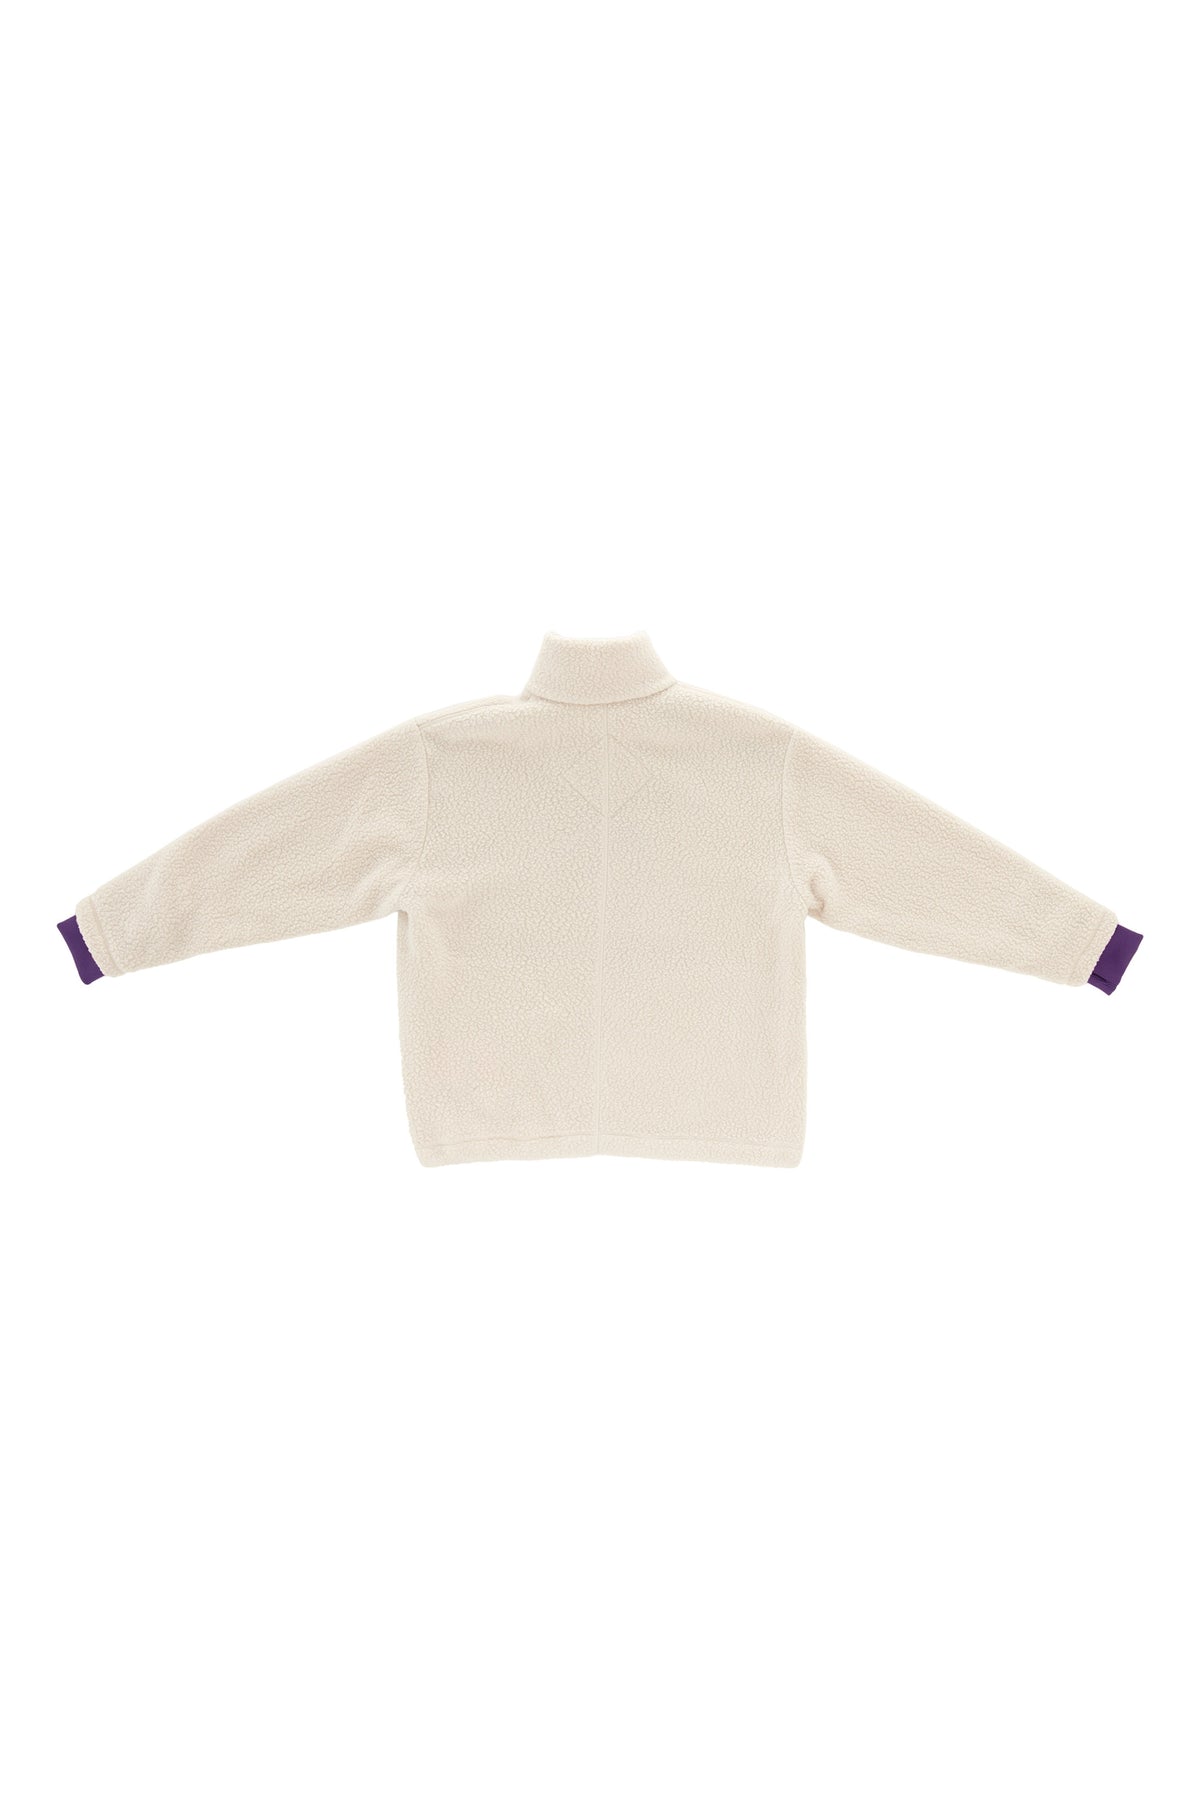 P.A.M. P.World Recycled Sherpa Sweater - Pelican